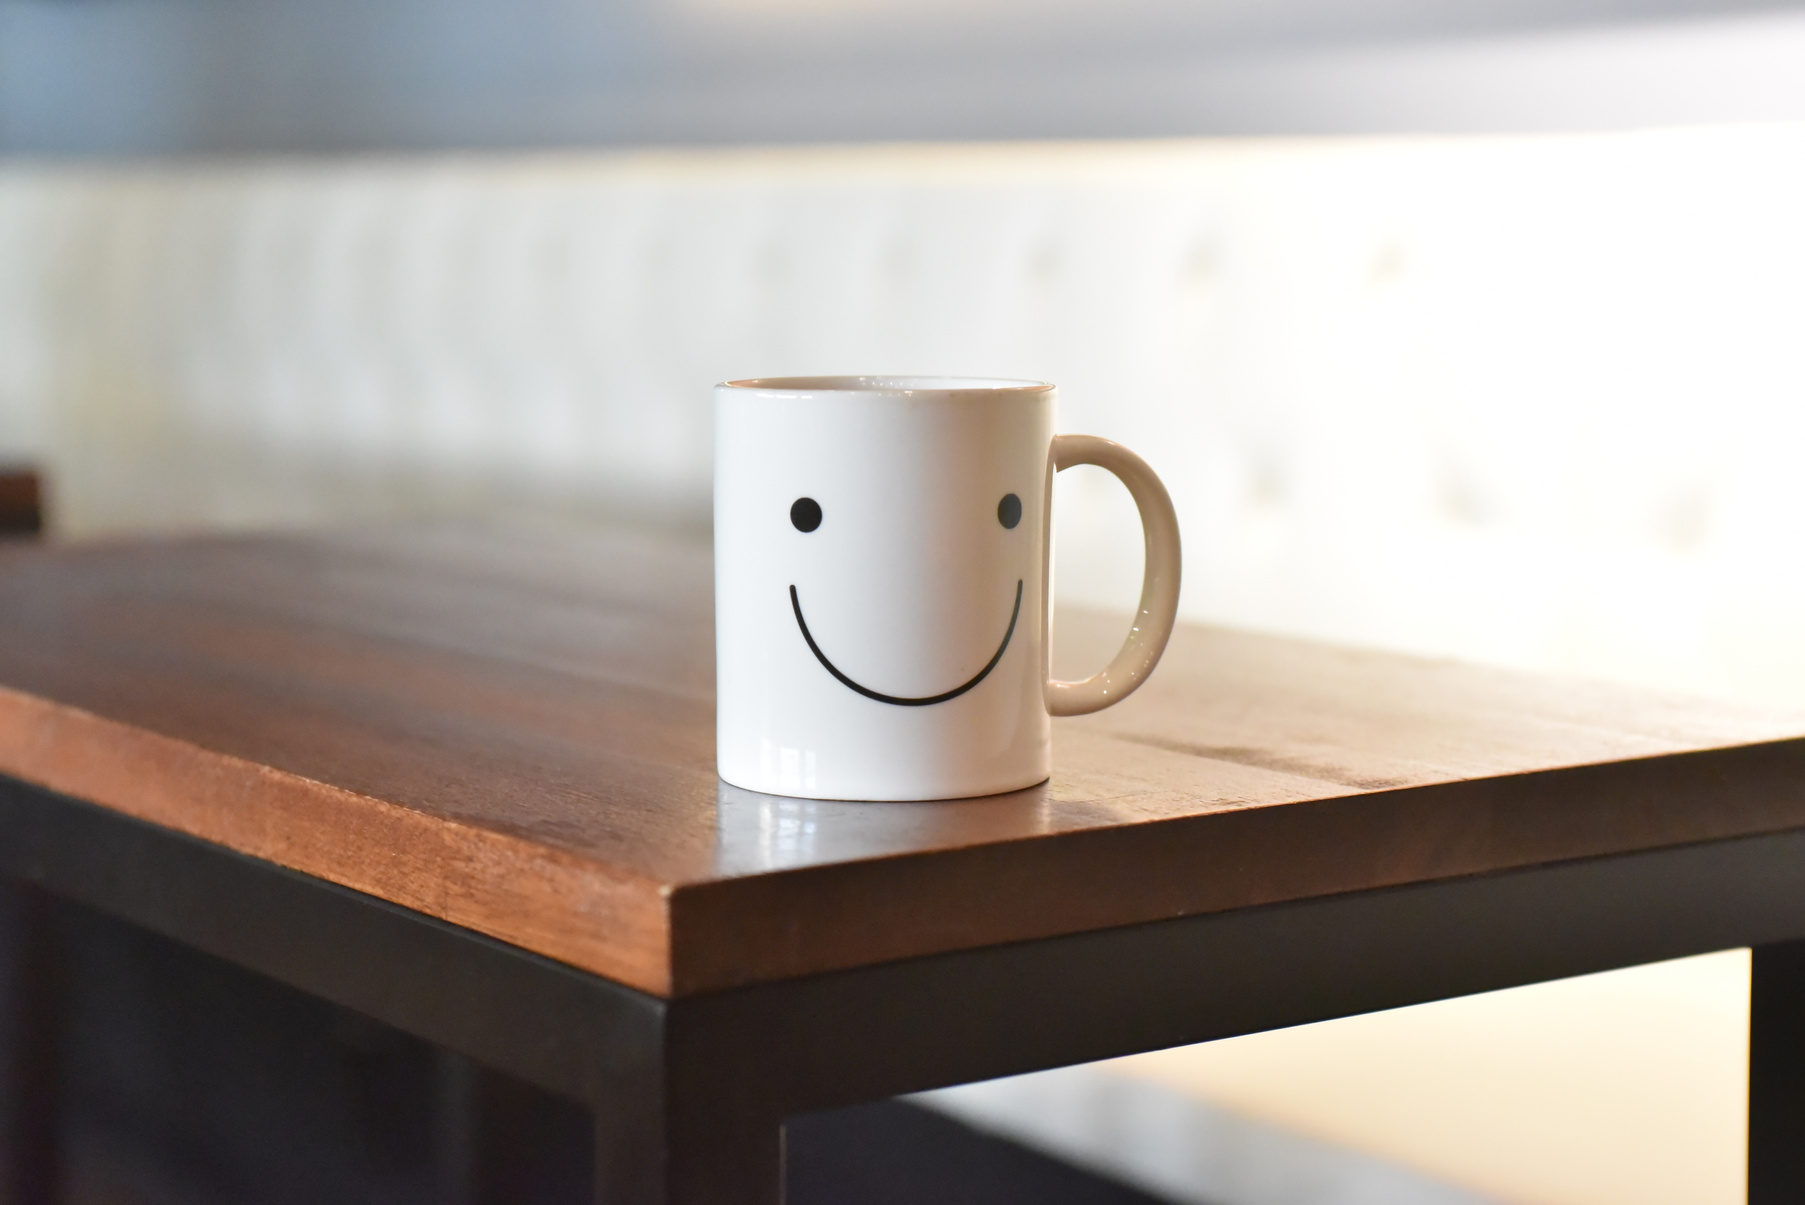 Mug With Smiling Face on Wooden Table